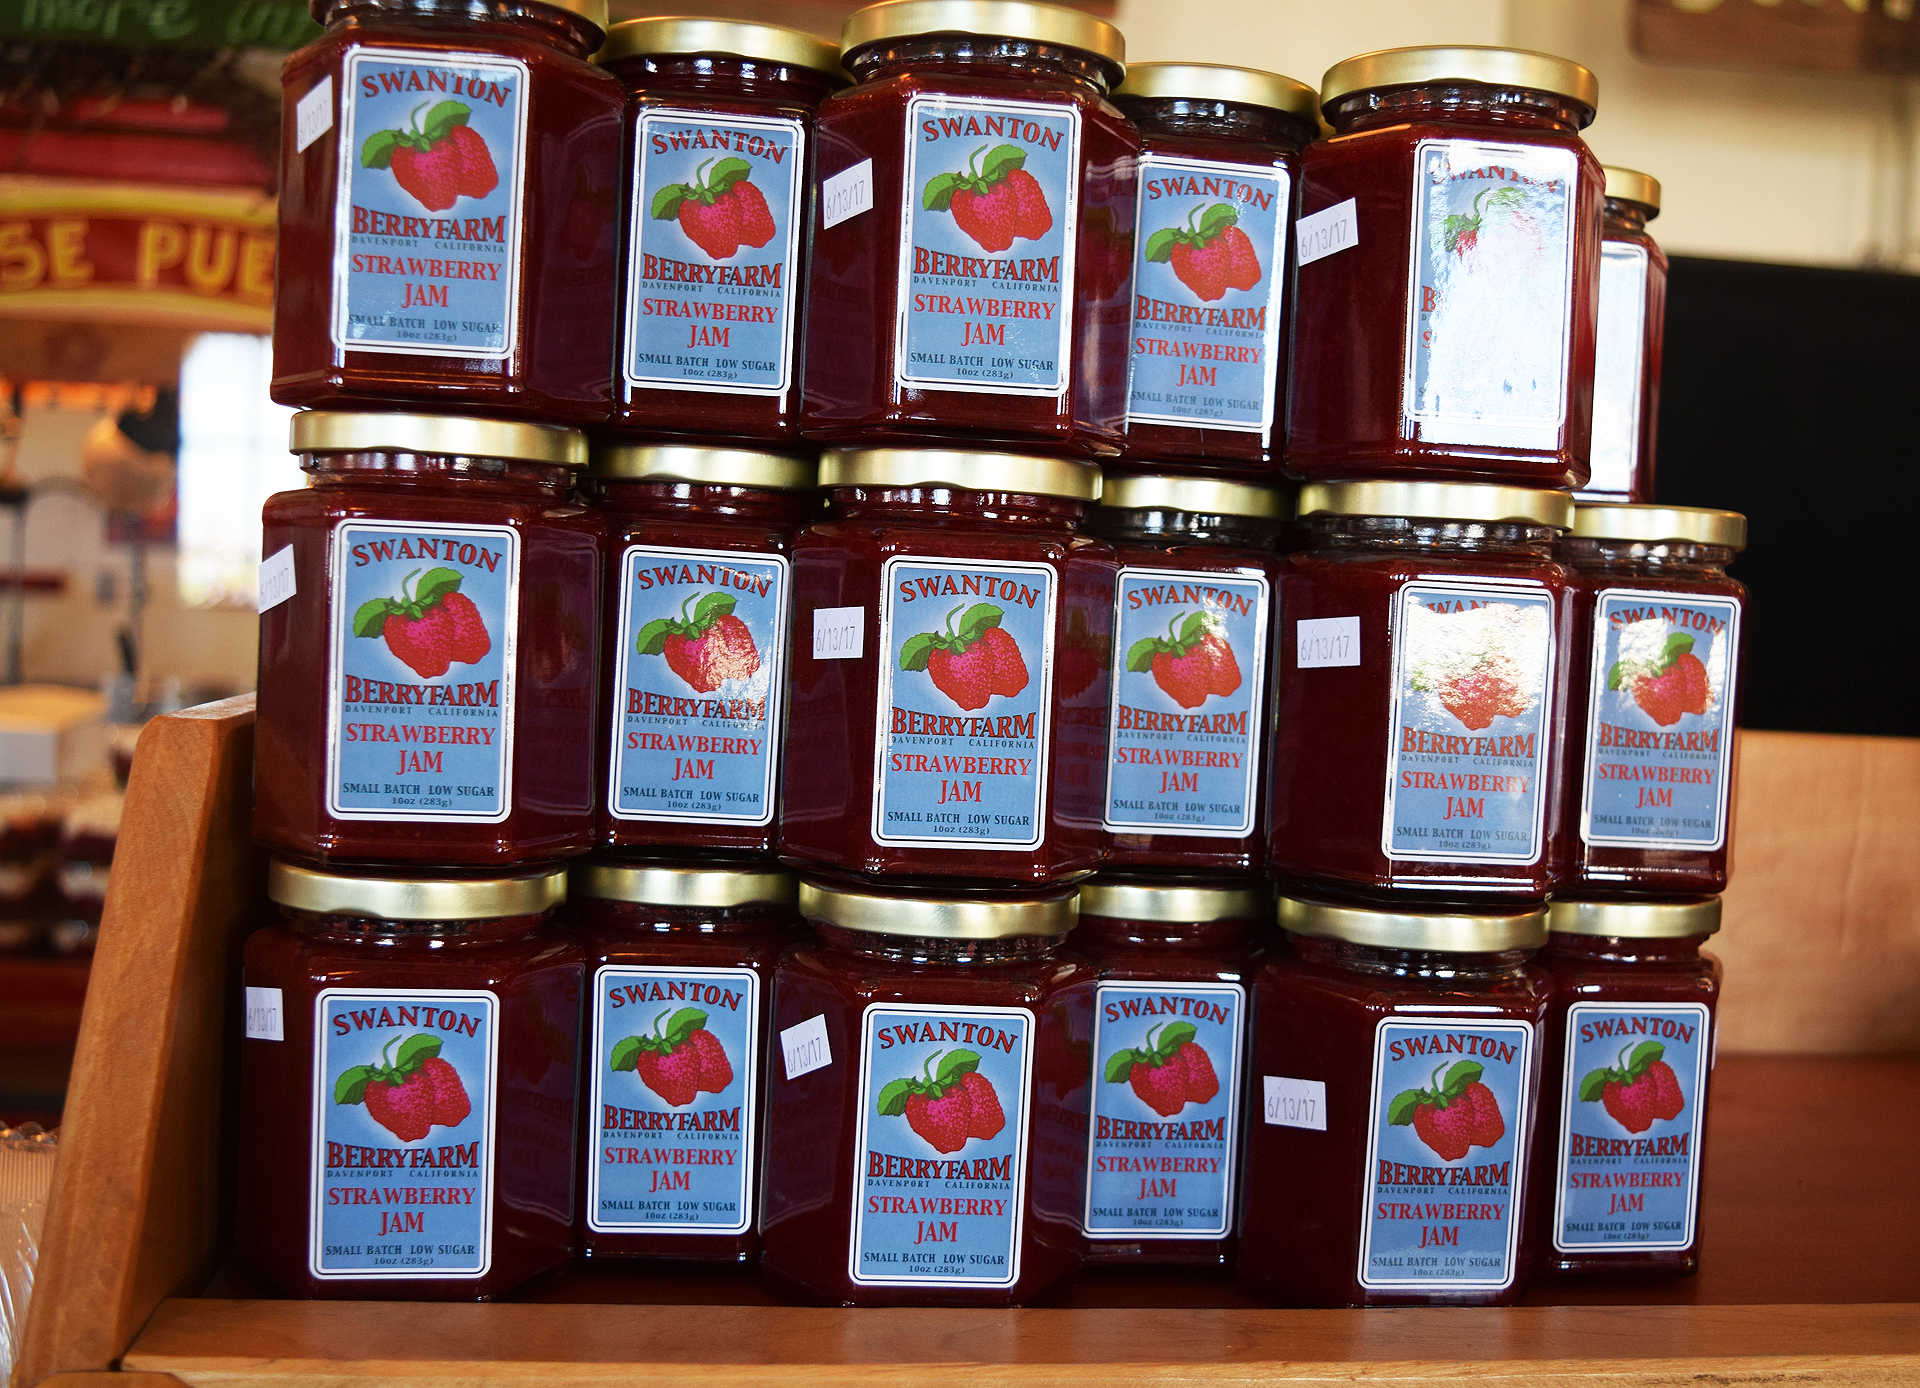 Swanton Berry Farm produces jam made from its fantastic fruit, which is often available at its farmers market stands.